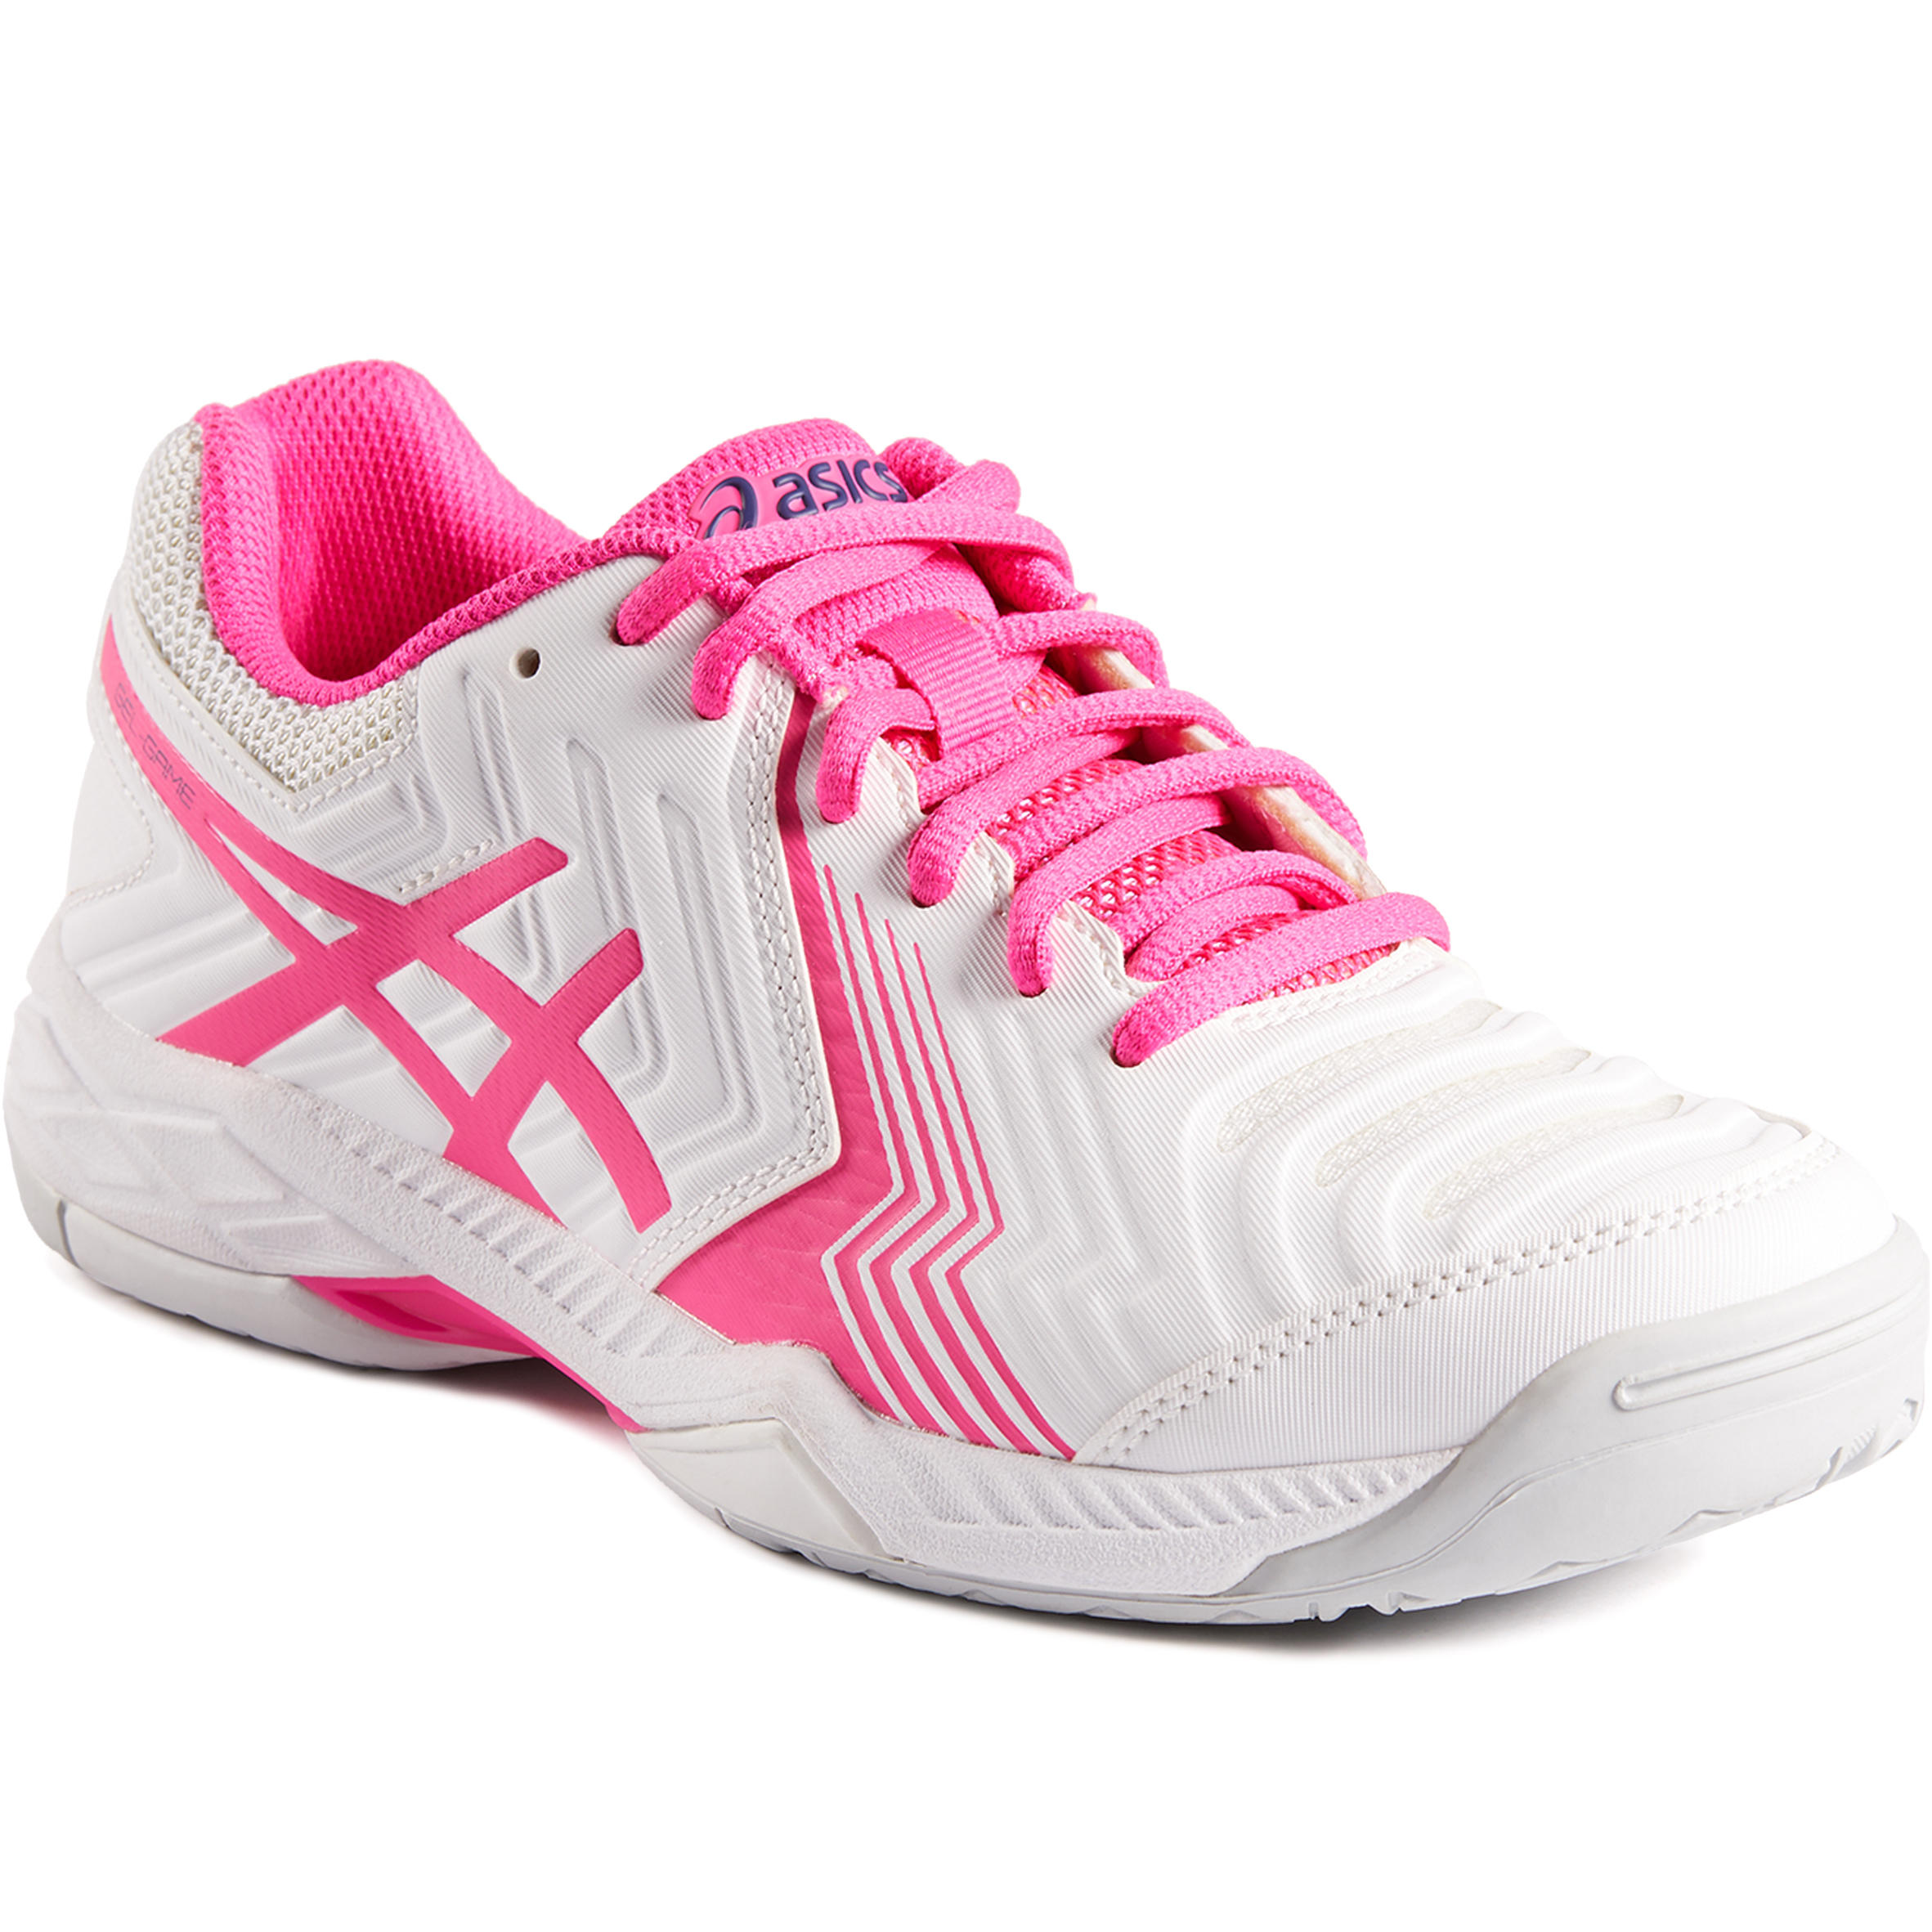 asics gel game 6 womens review